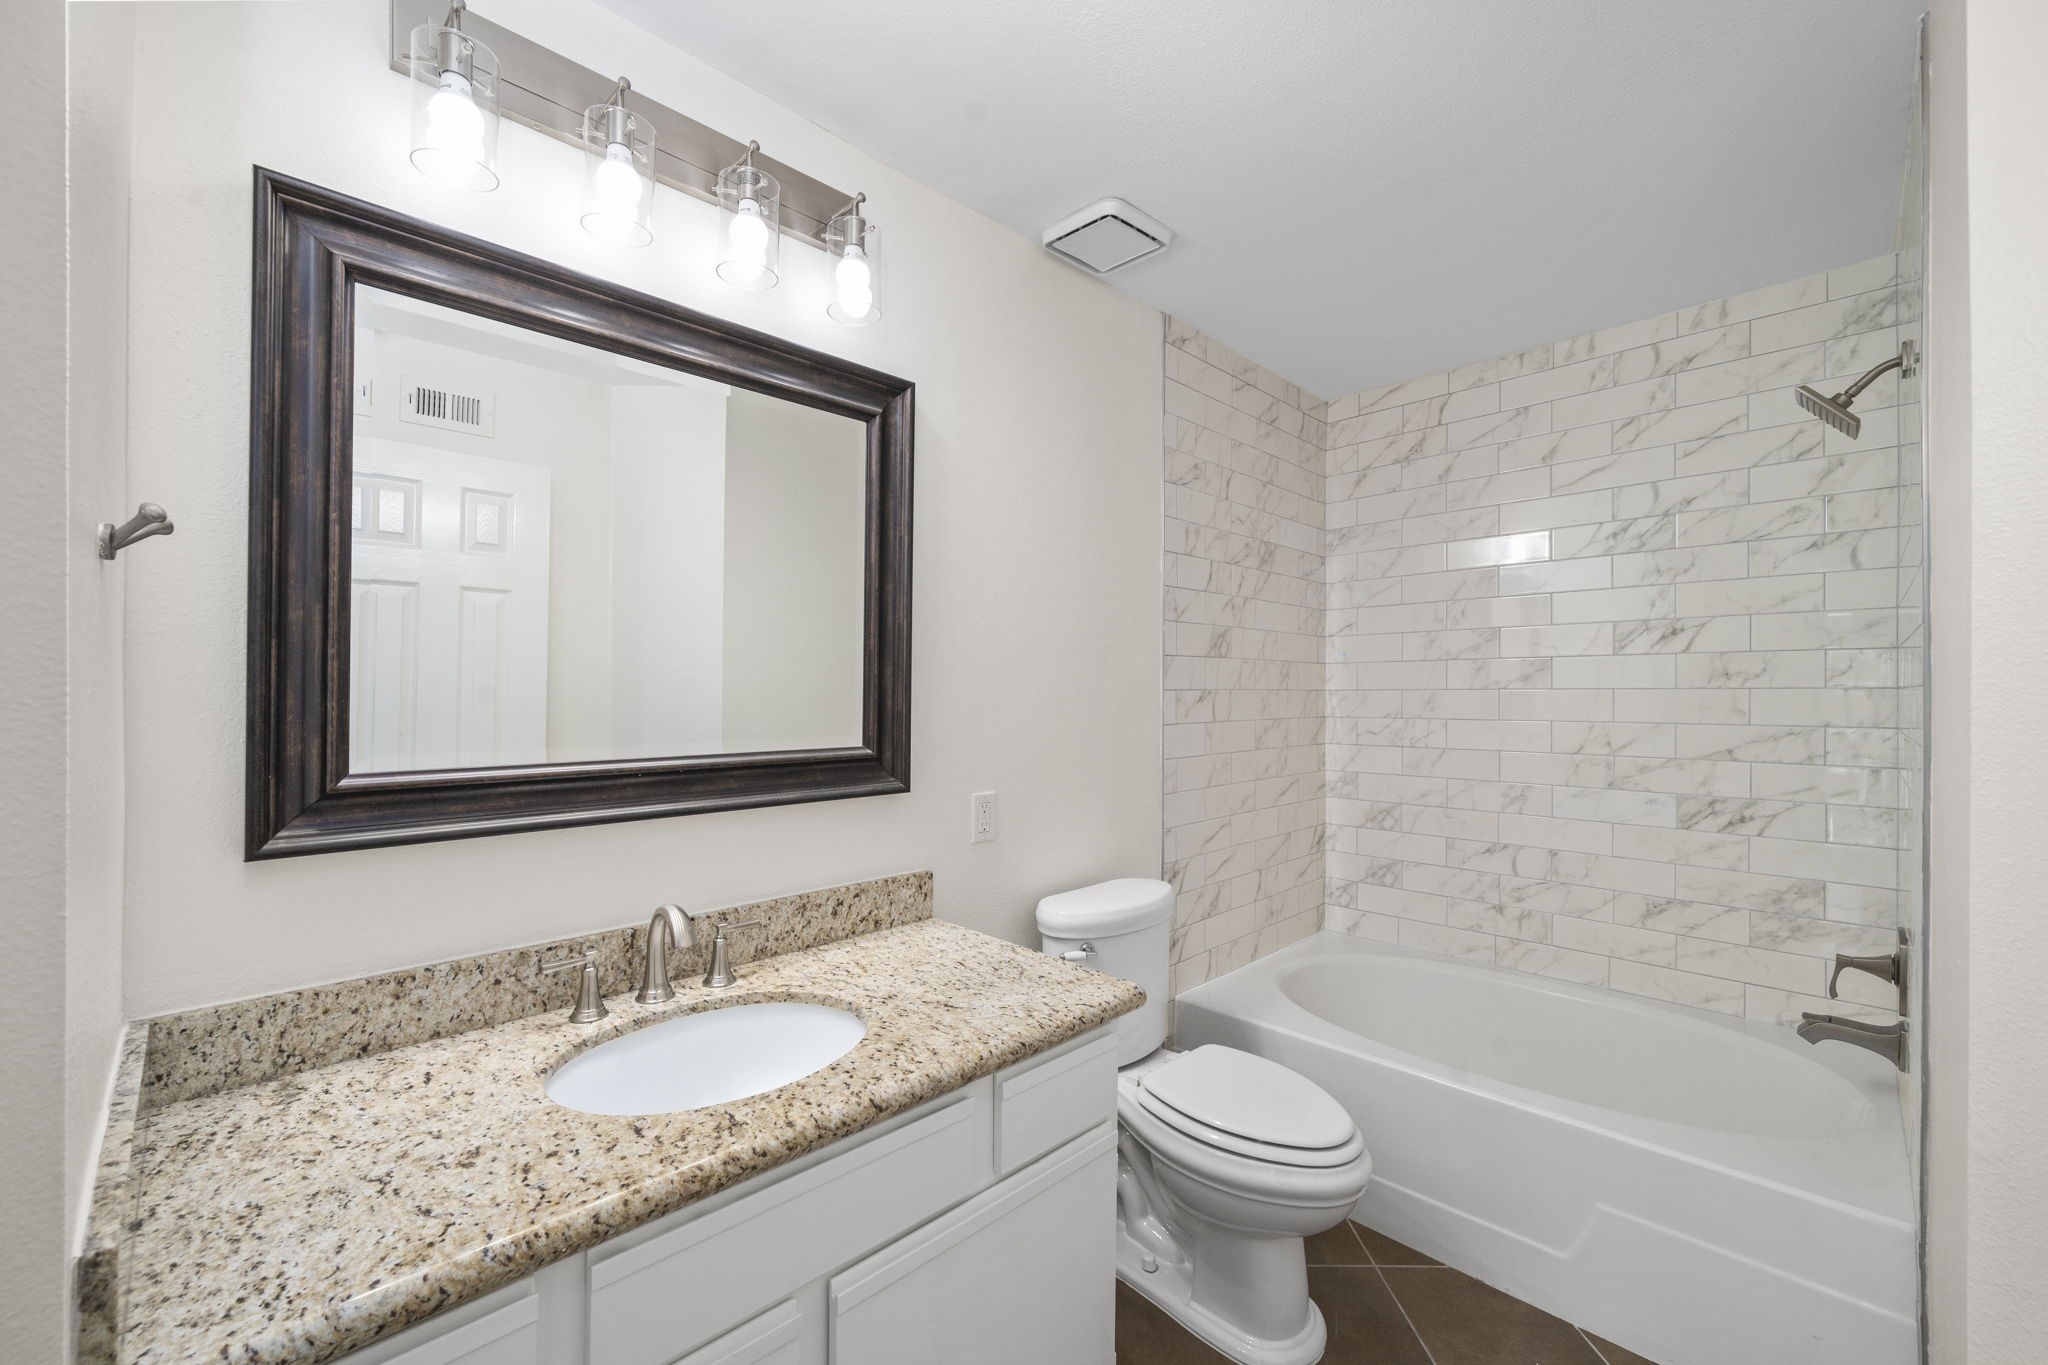 Consistency reigns in the bathrooms, reflecting the unit's overall aesthetic. The cream marble harmoniously complements the white accents, creating a captivating visual synergy.